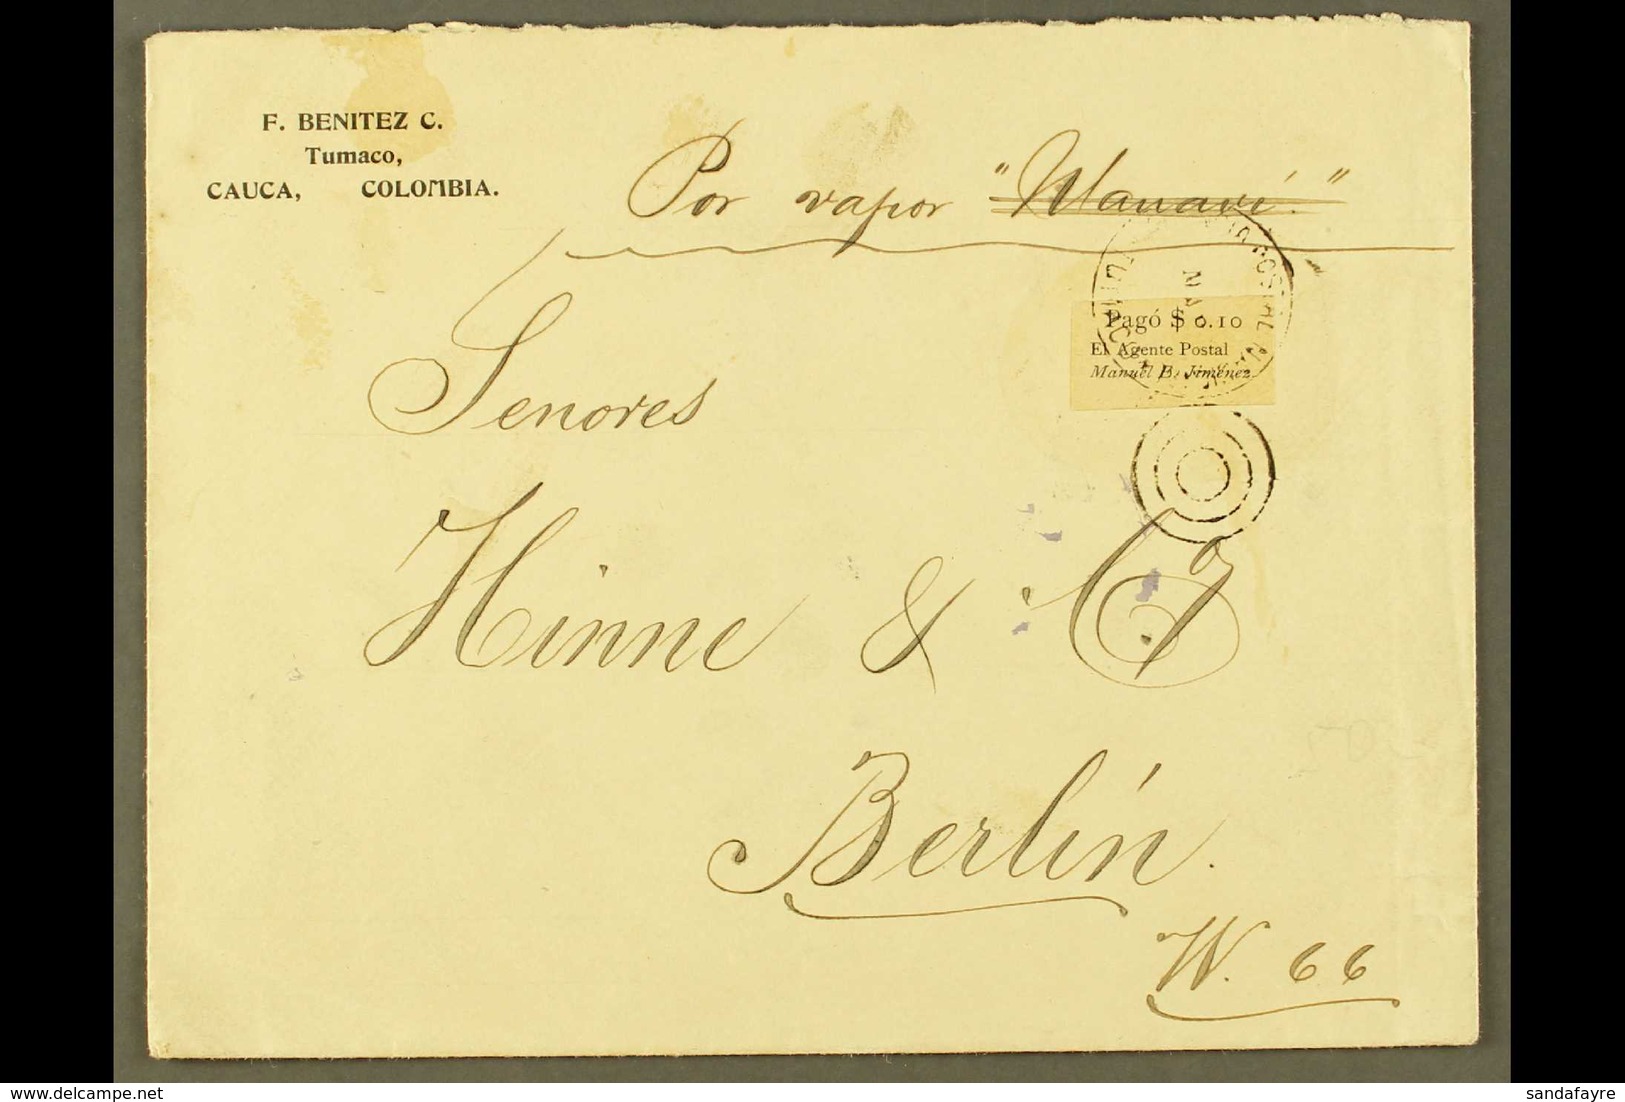 TUMACO 1901 Cover Addressed To Germany, Bearing 1901 0.10p Black Imperf 'El Agente Postal Manuel E. Jimenez' LOCAL STAMP - Colombie